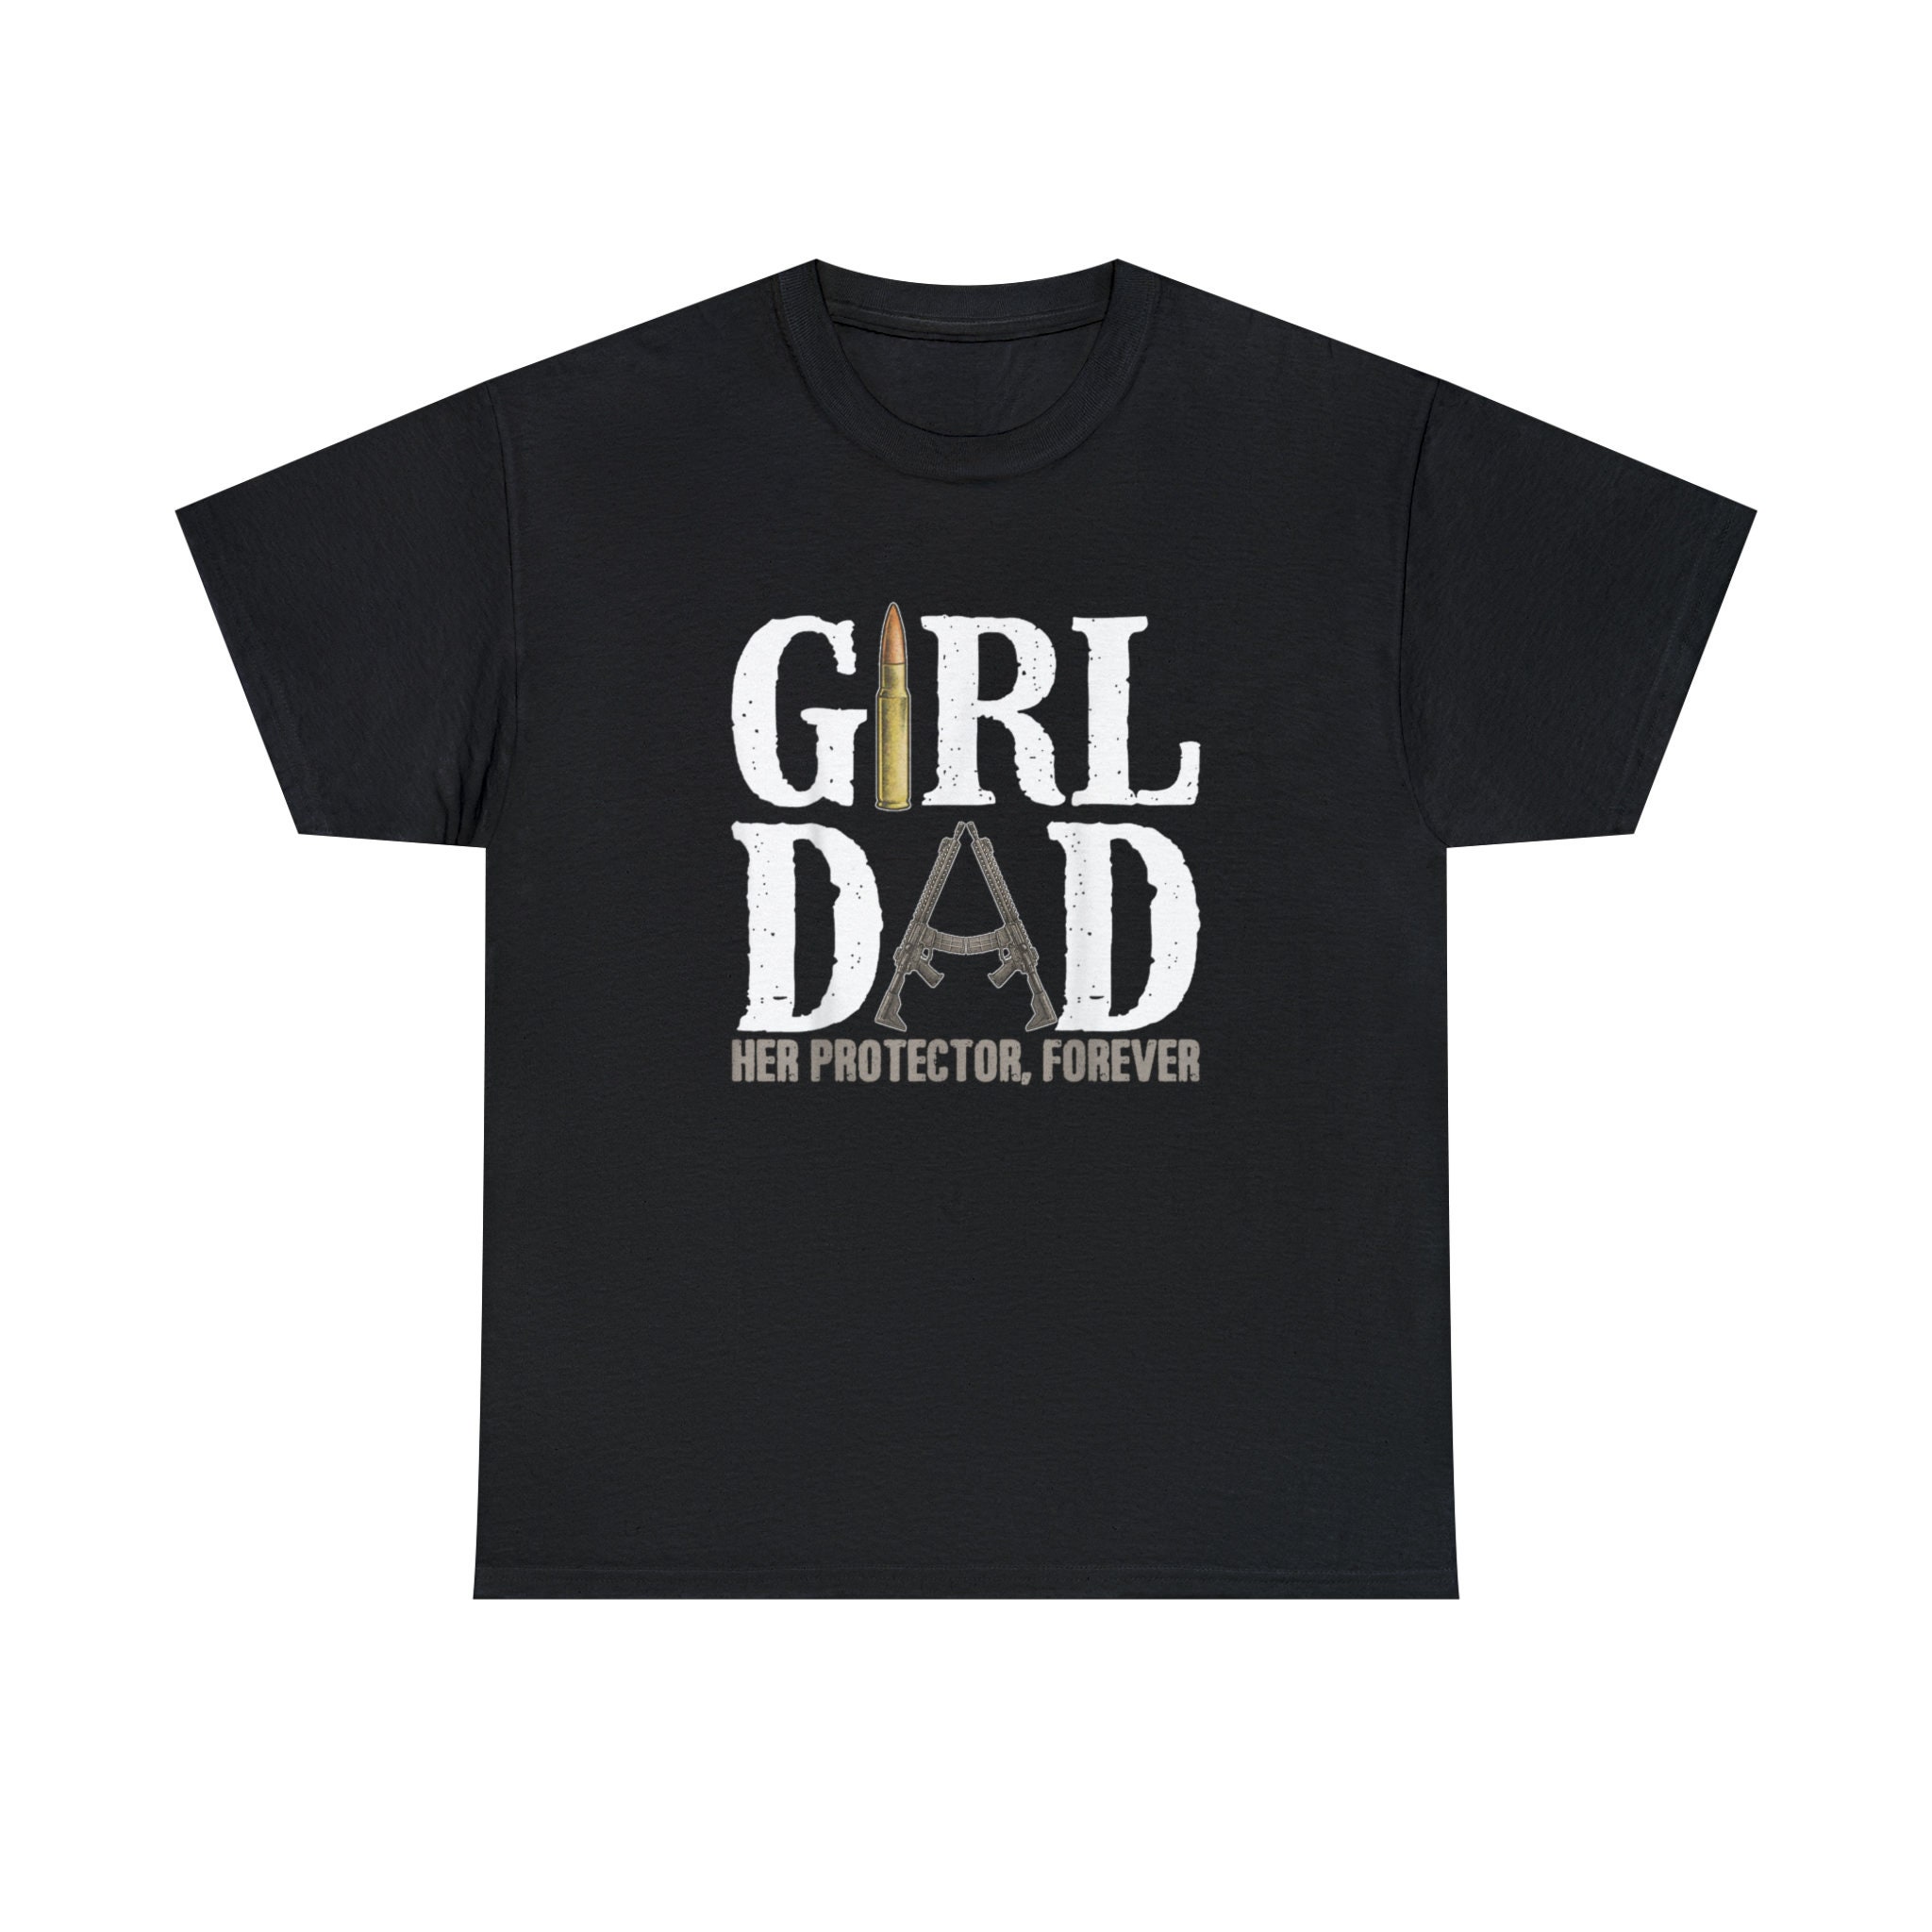 Girl Dad Her Protector Forever Shirt Sex Image Hq